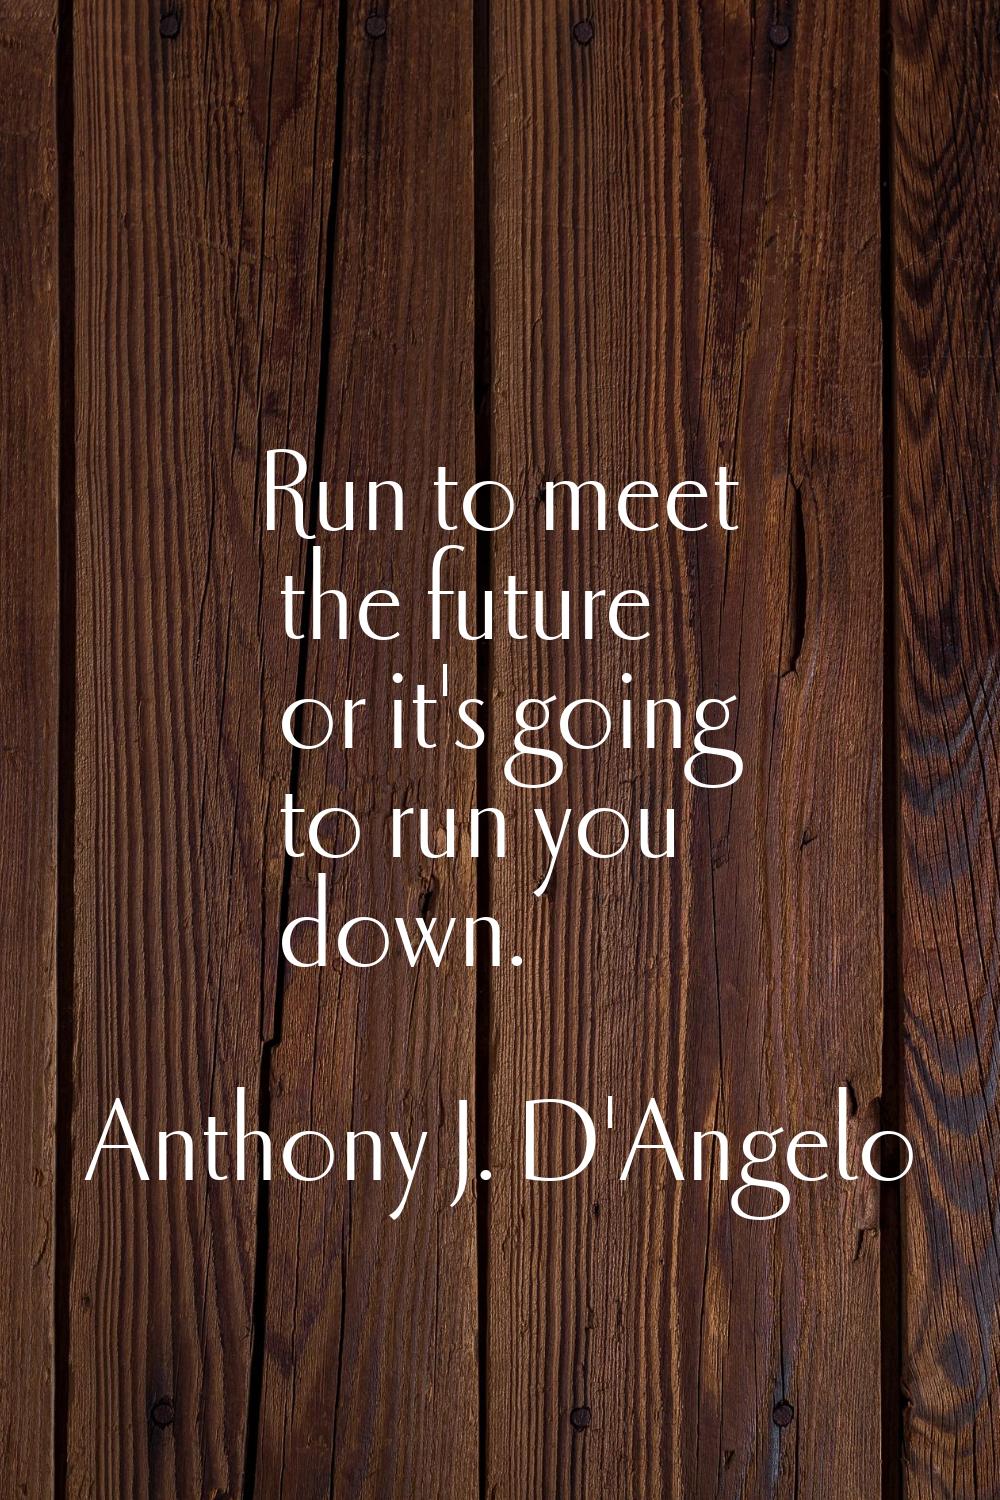 Run to meet the future or it's going to run you down.